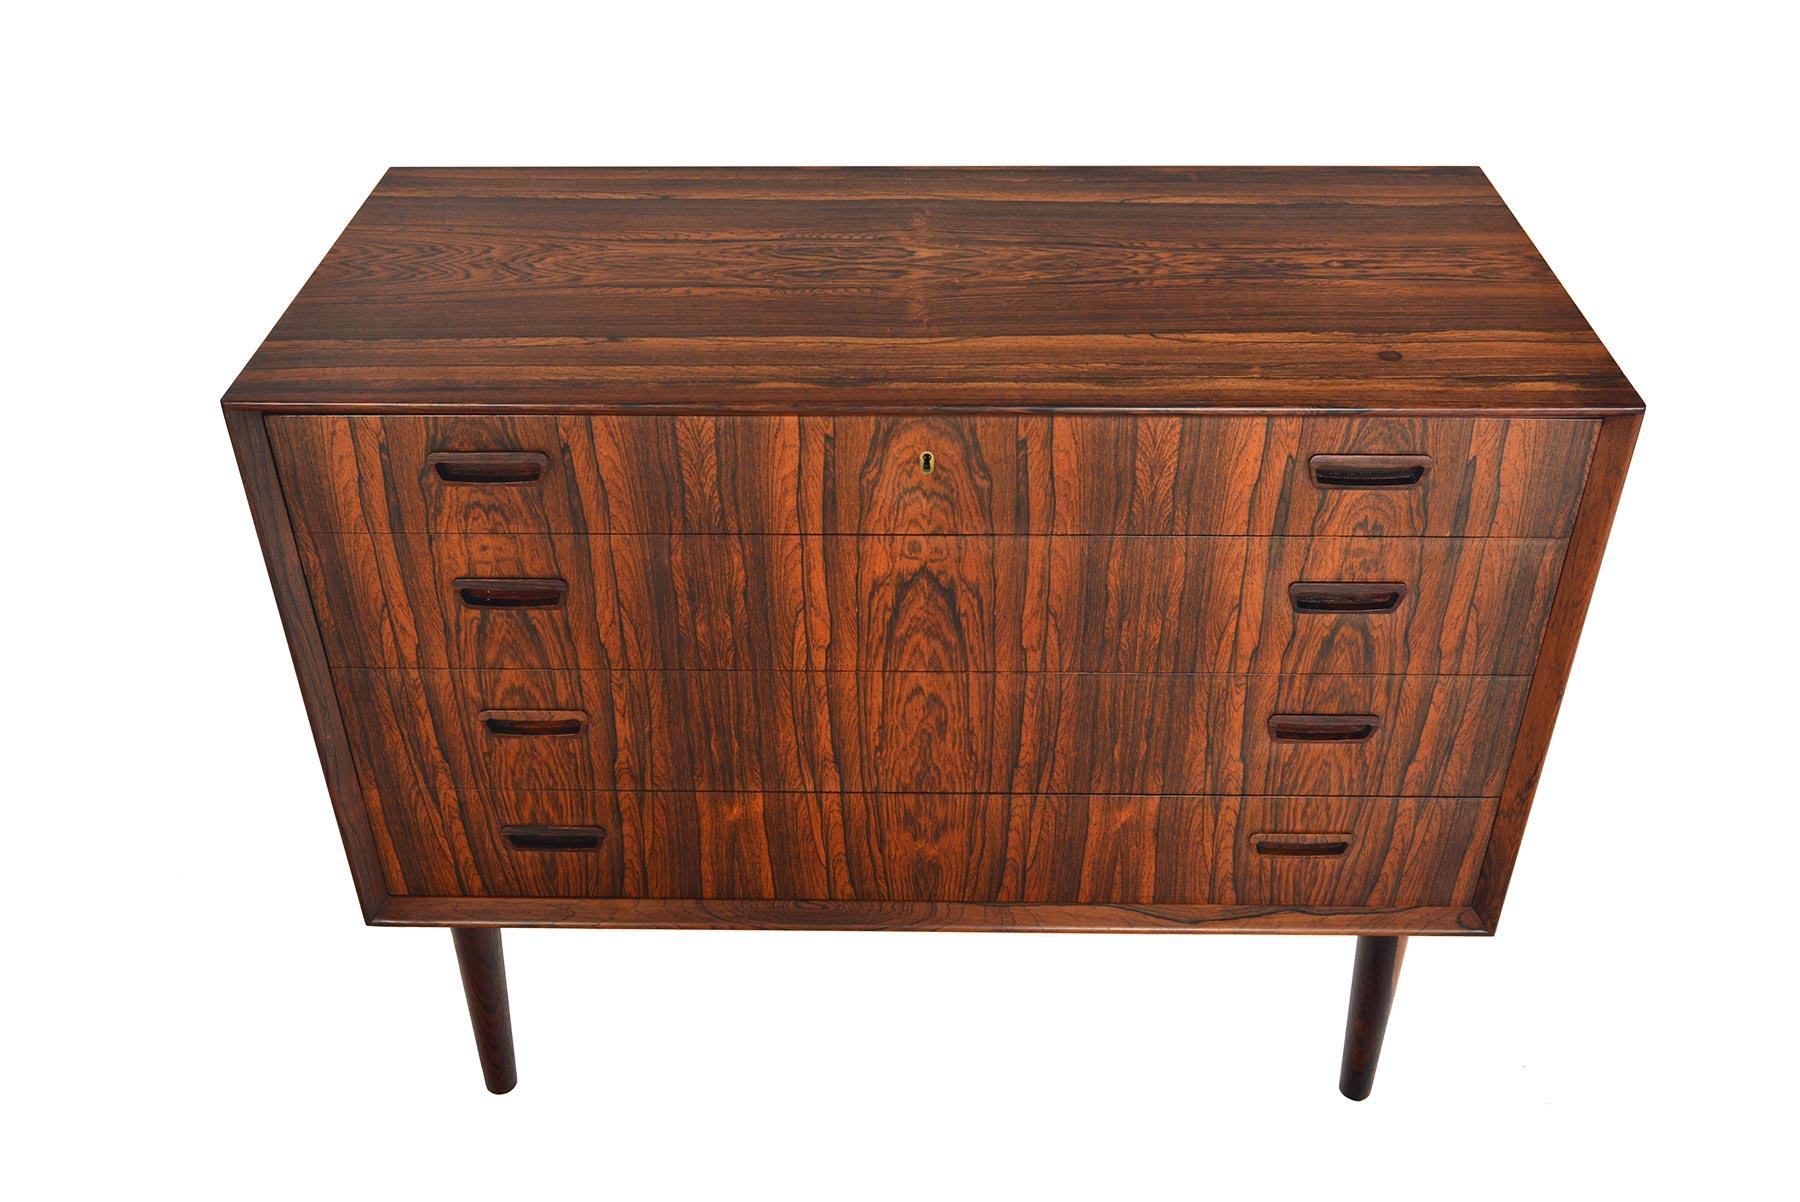 This jaw-dropping Danish modern midcentury gentleman’s chest features four extra wide drawers accented by hand carved rectangular drawer pulls. Designed by Borge Seindal, this stunning piece was manufactured on November 23rd, 1965, and is finished